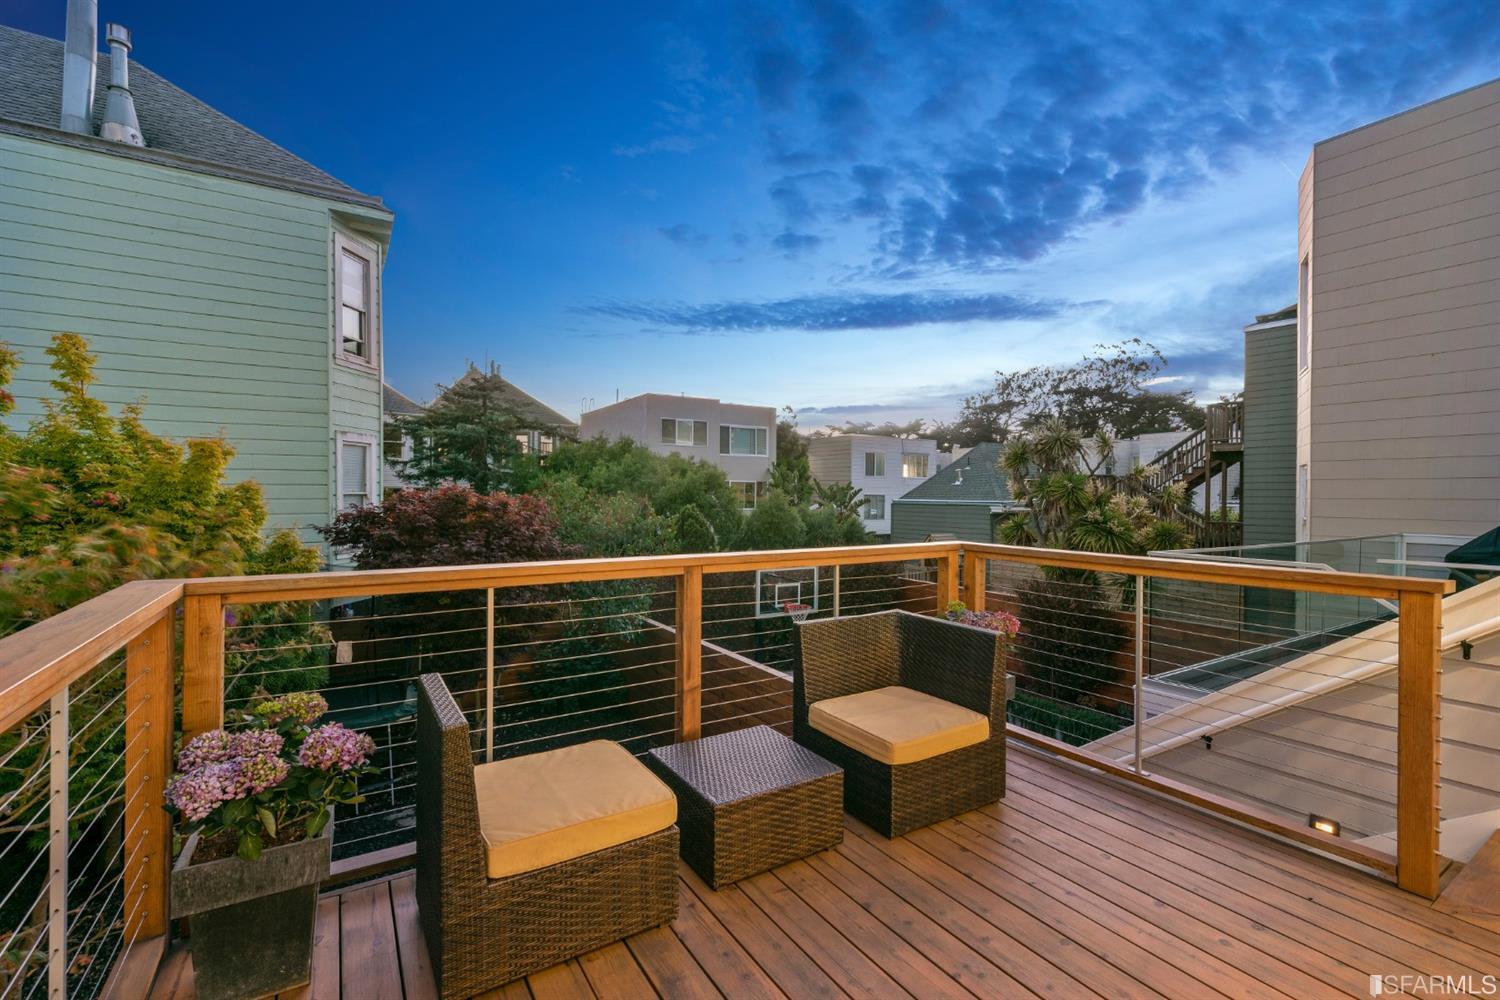 Property Photo: Upper deck at twilight, showing a beautiful blue sky 